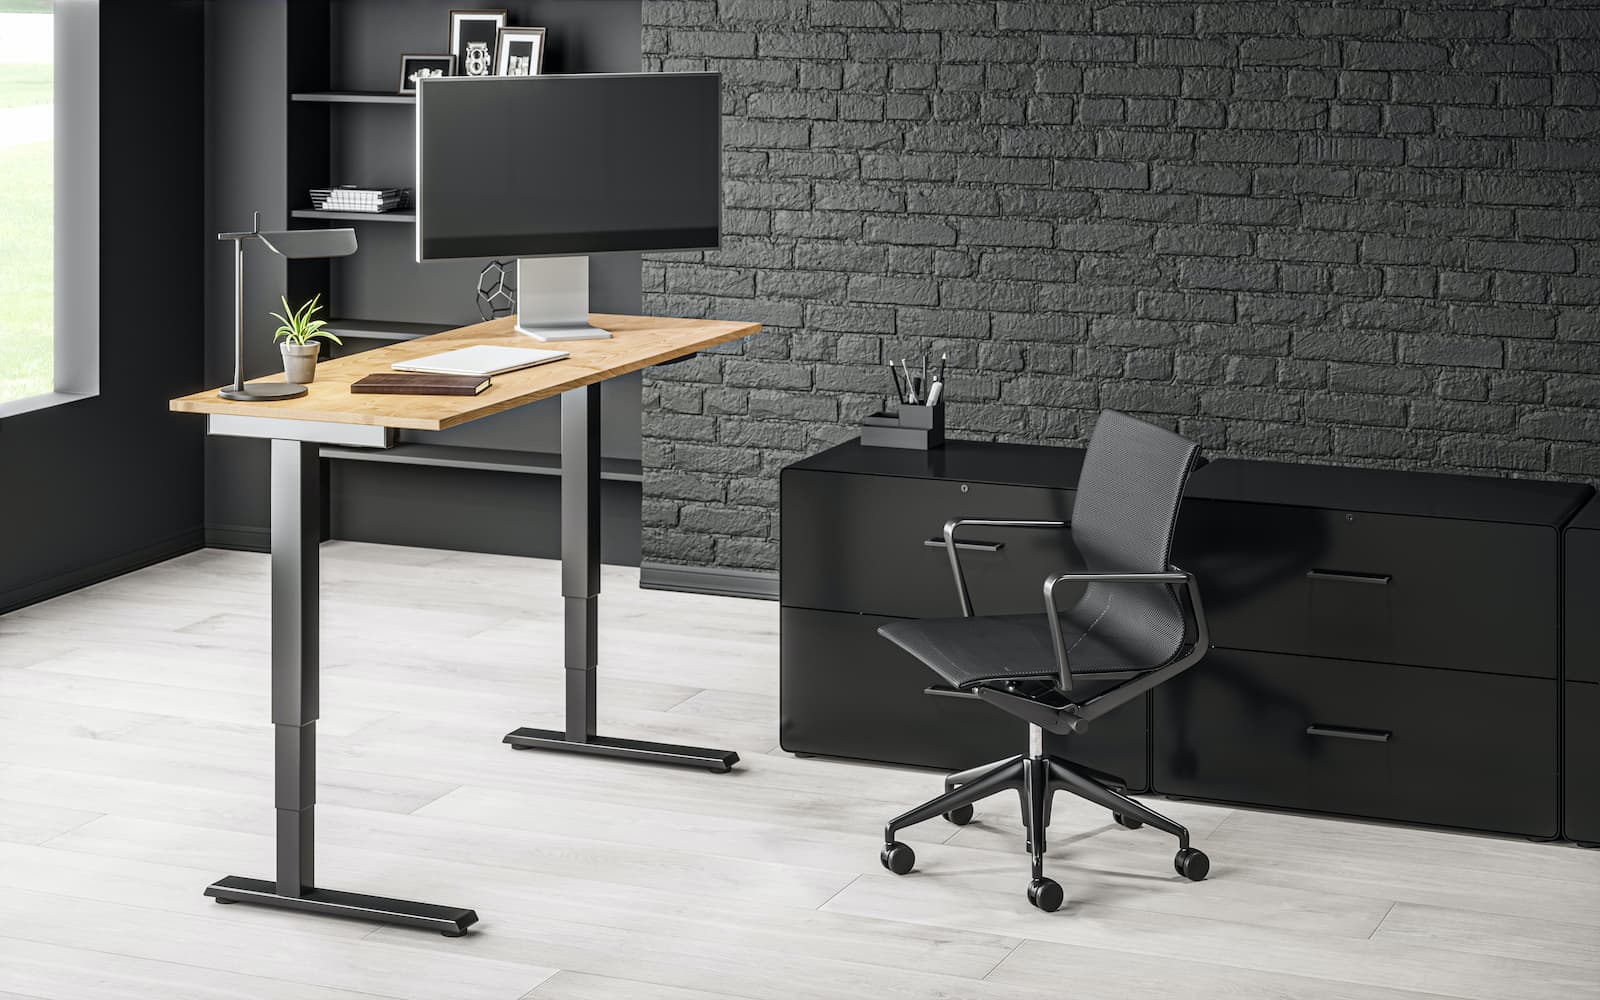 Upgrade your office space by buying a sleek and functional office table in Riyadh